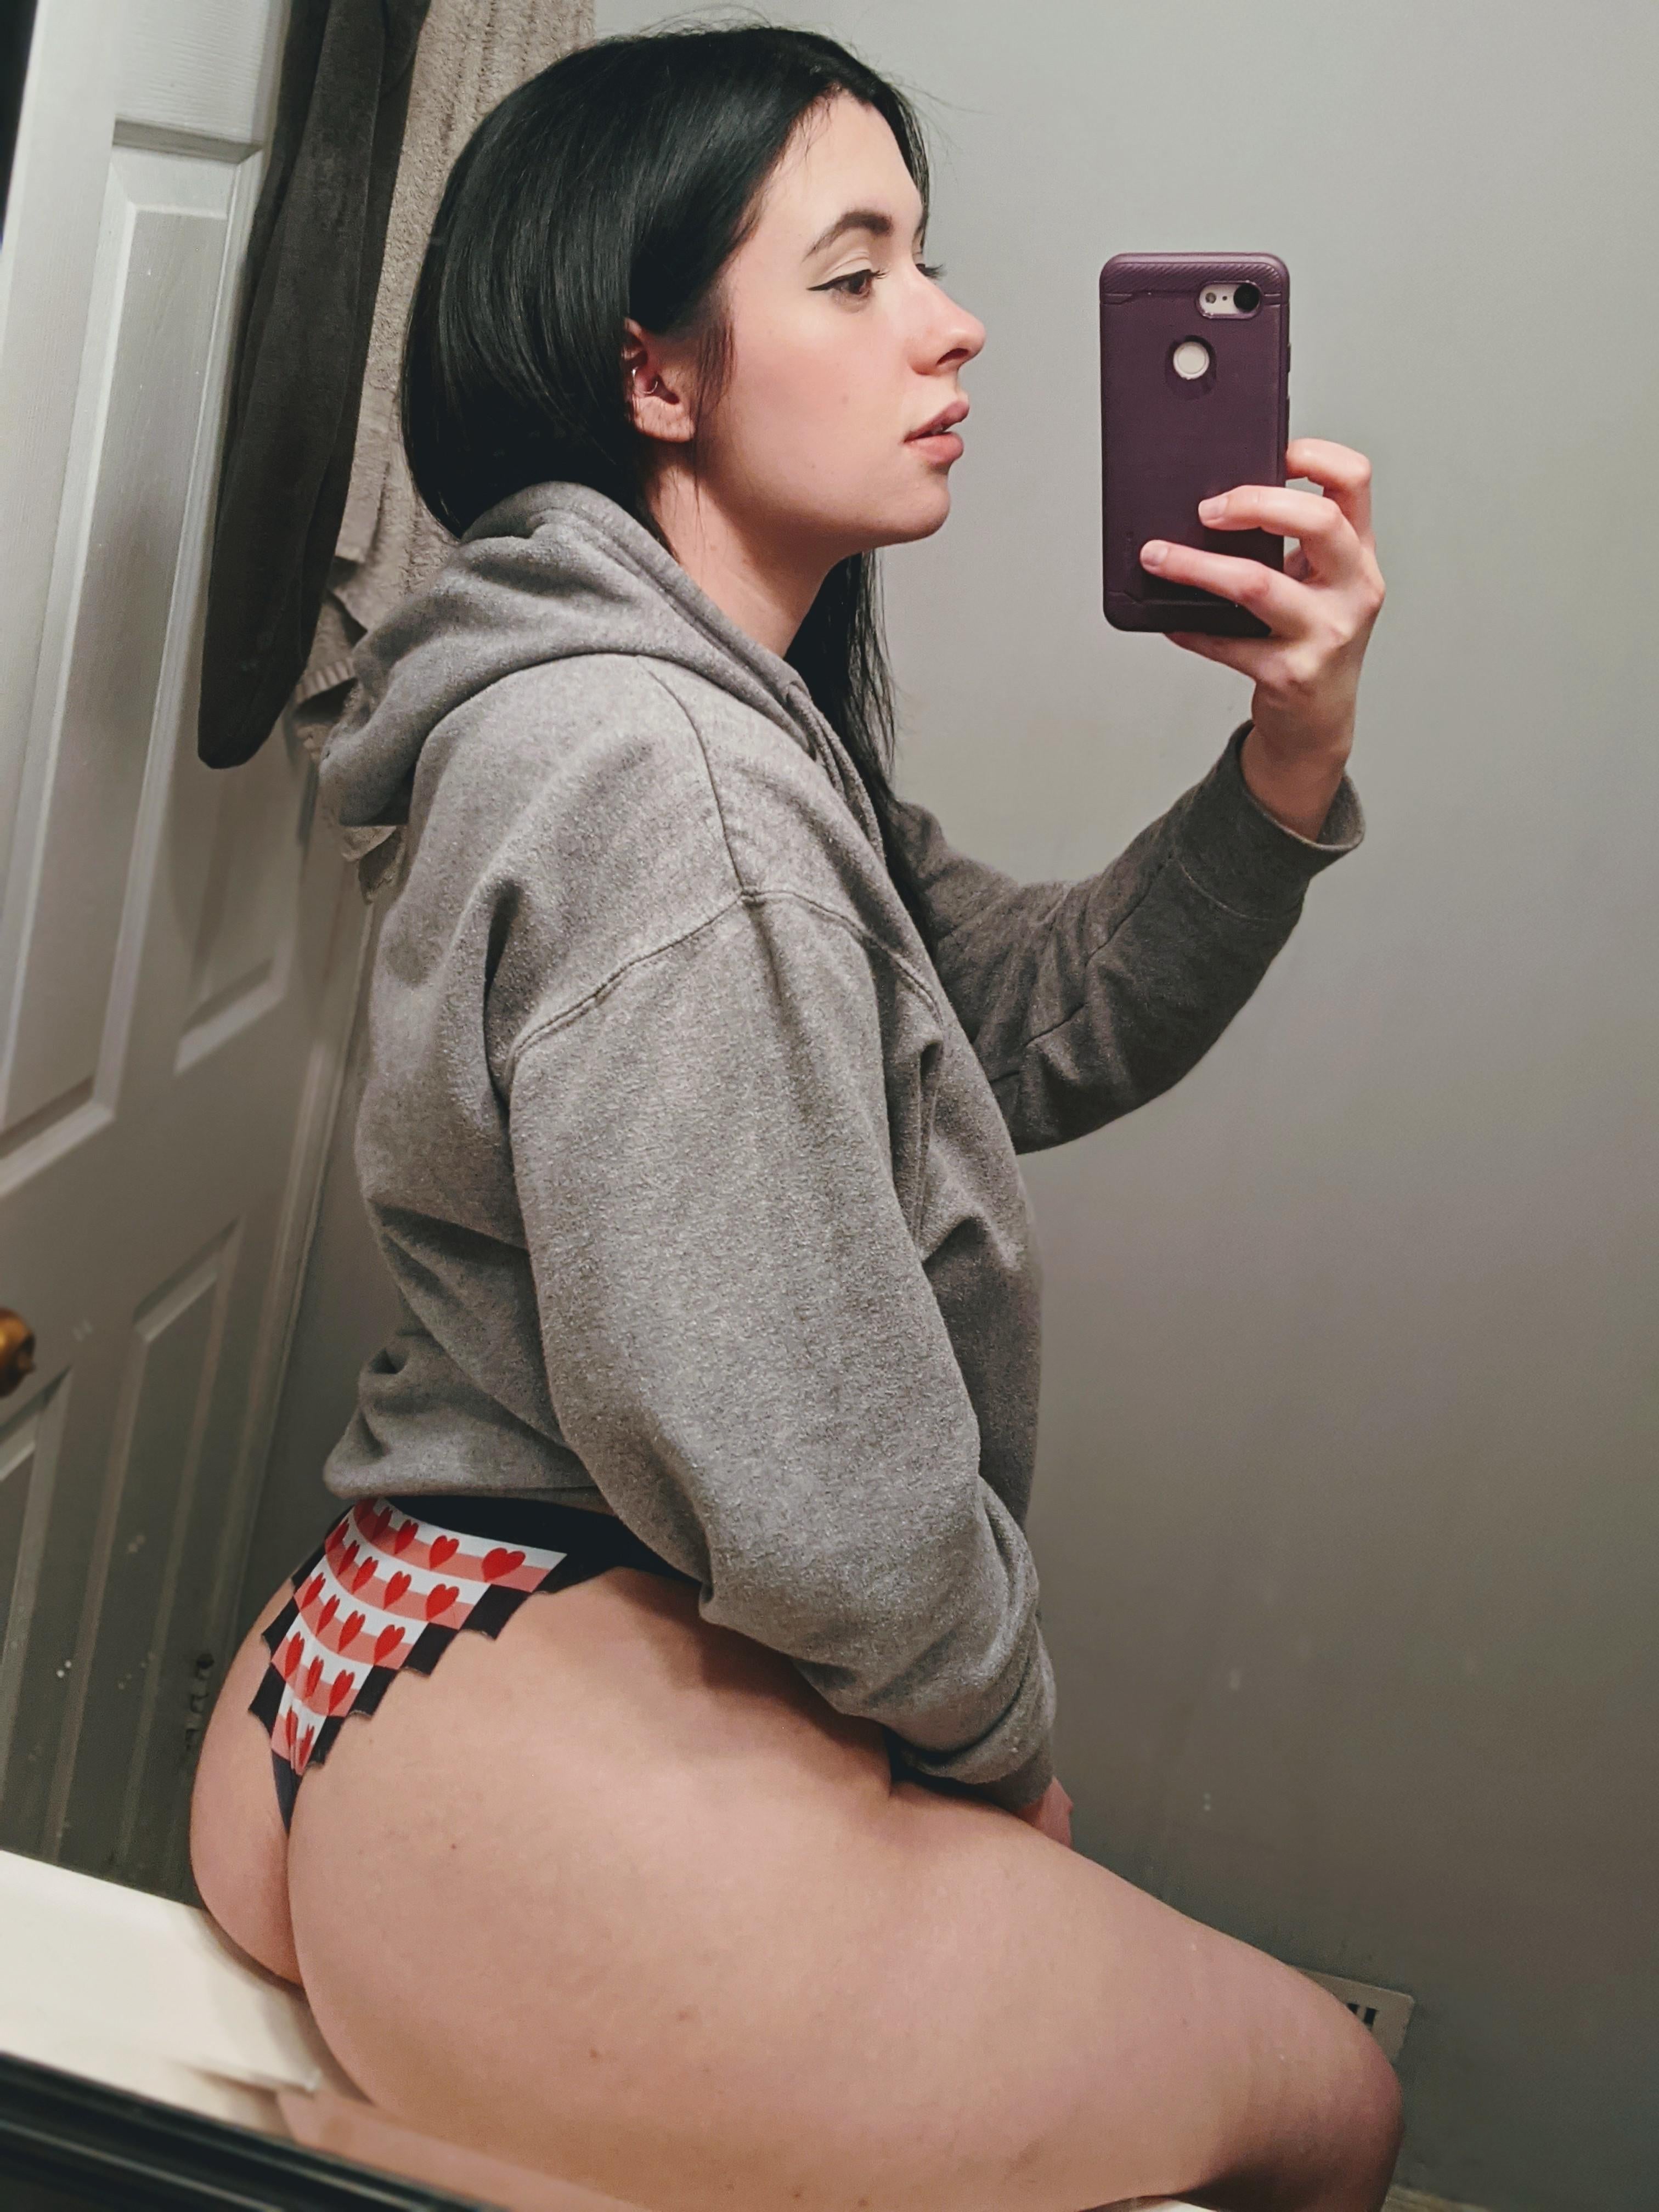 Happy Friday from me and my butt